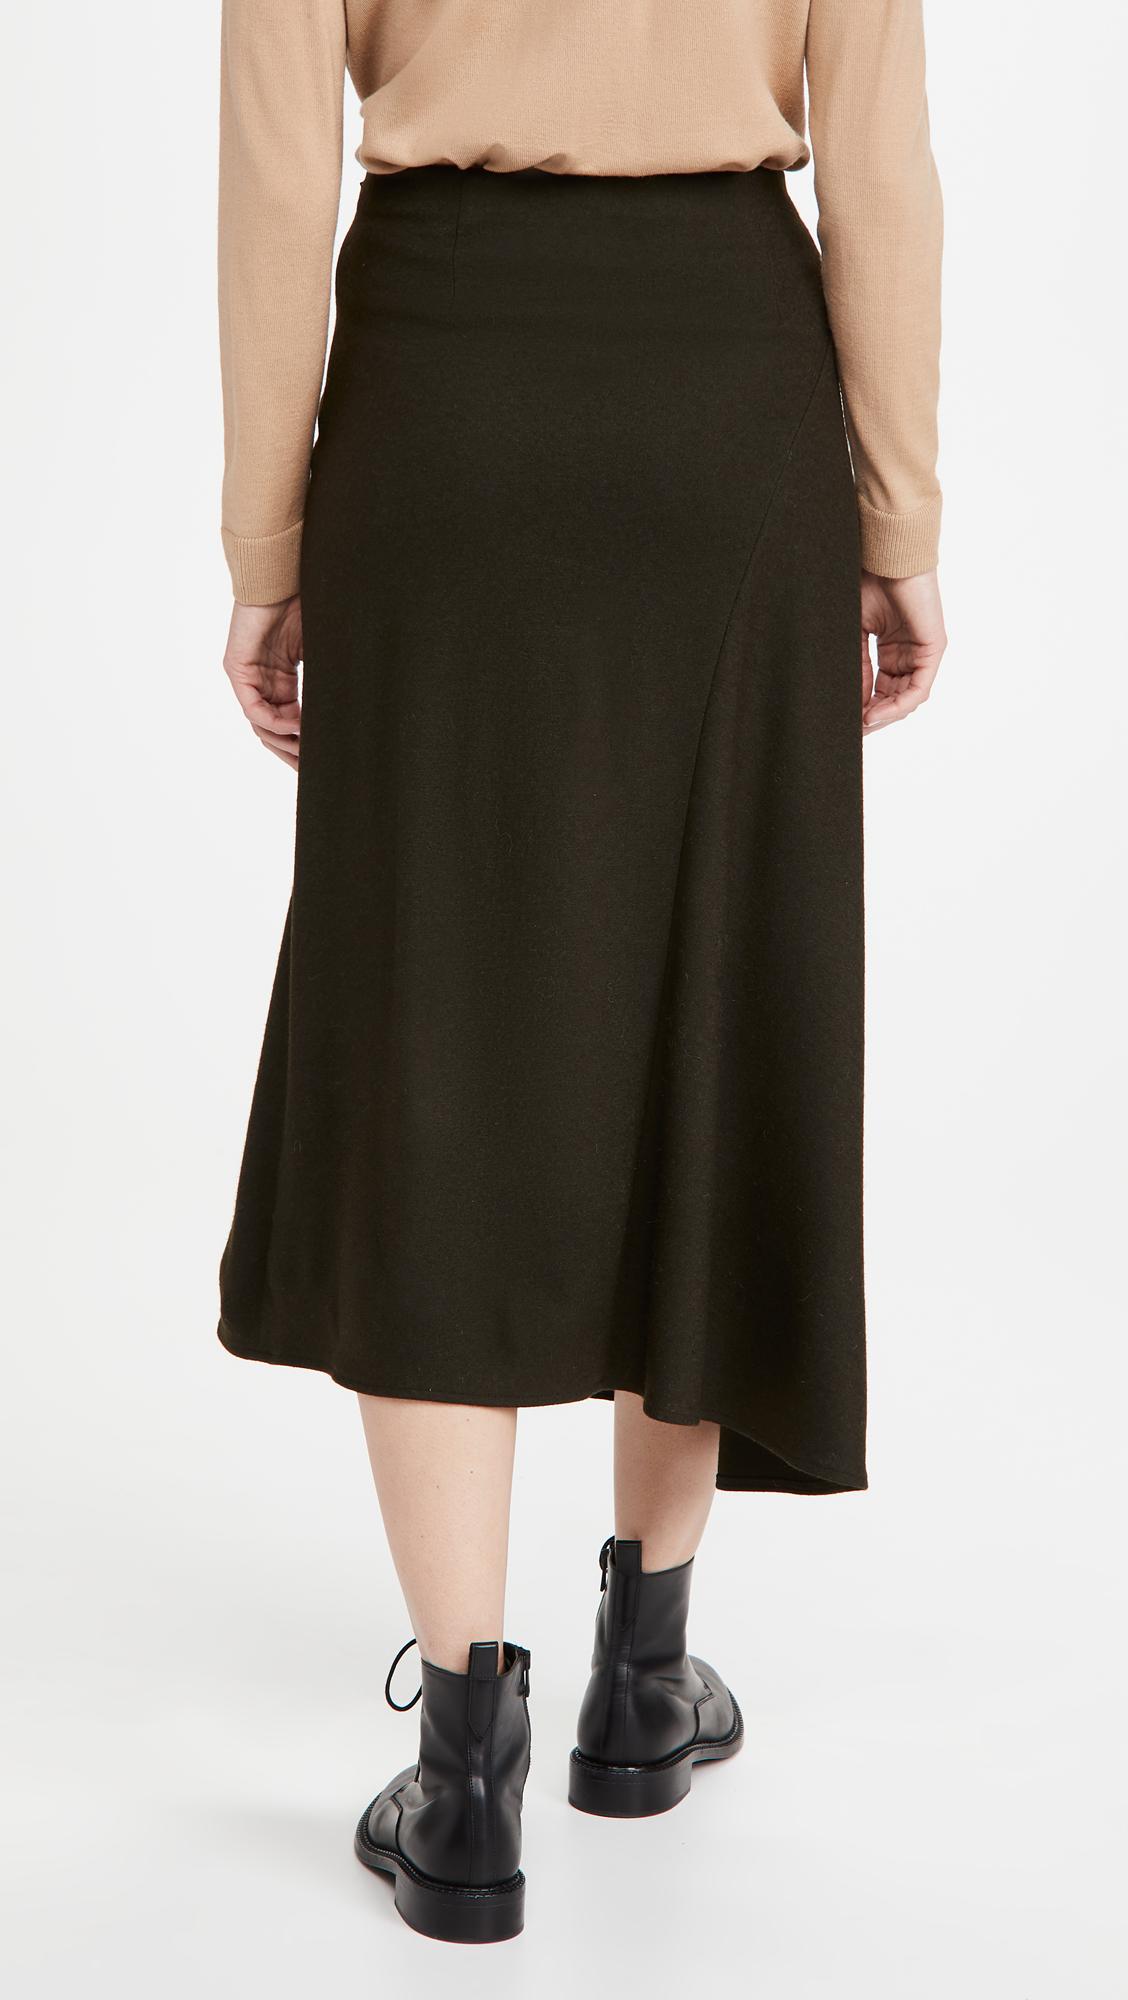 Vince Wool Cozy Asymmetric Skirt in Antique Olive (Black) - Lyst